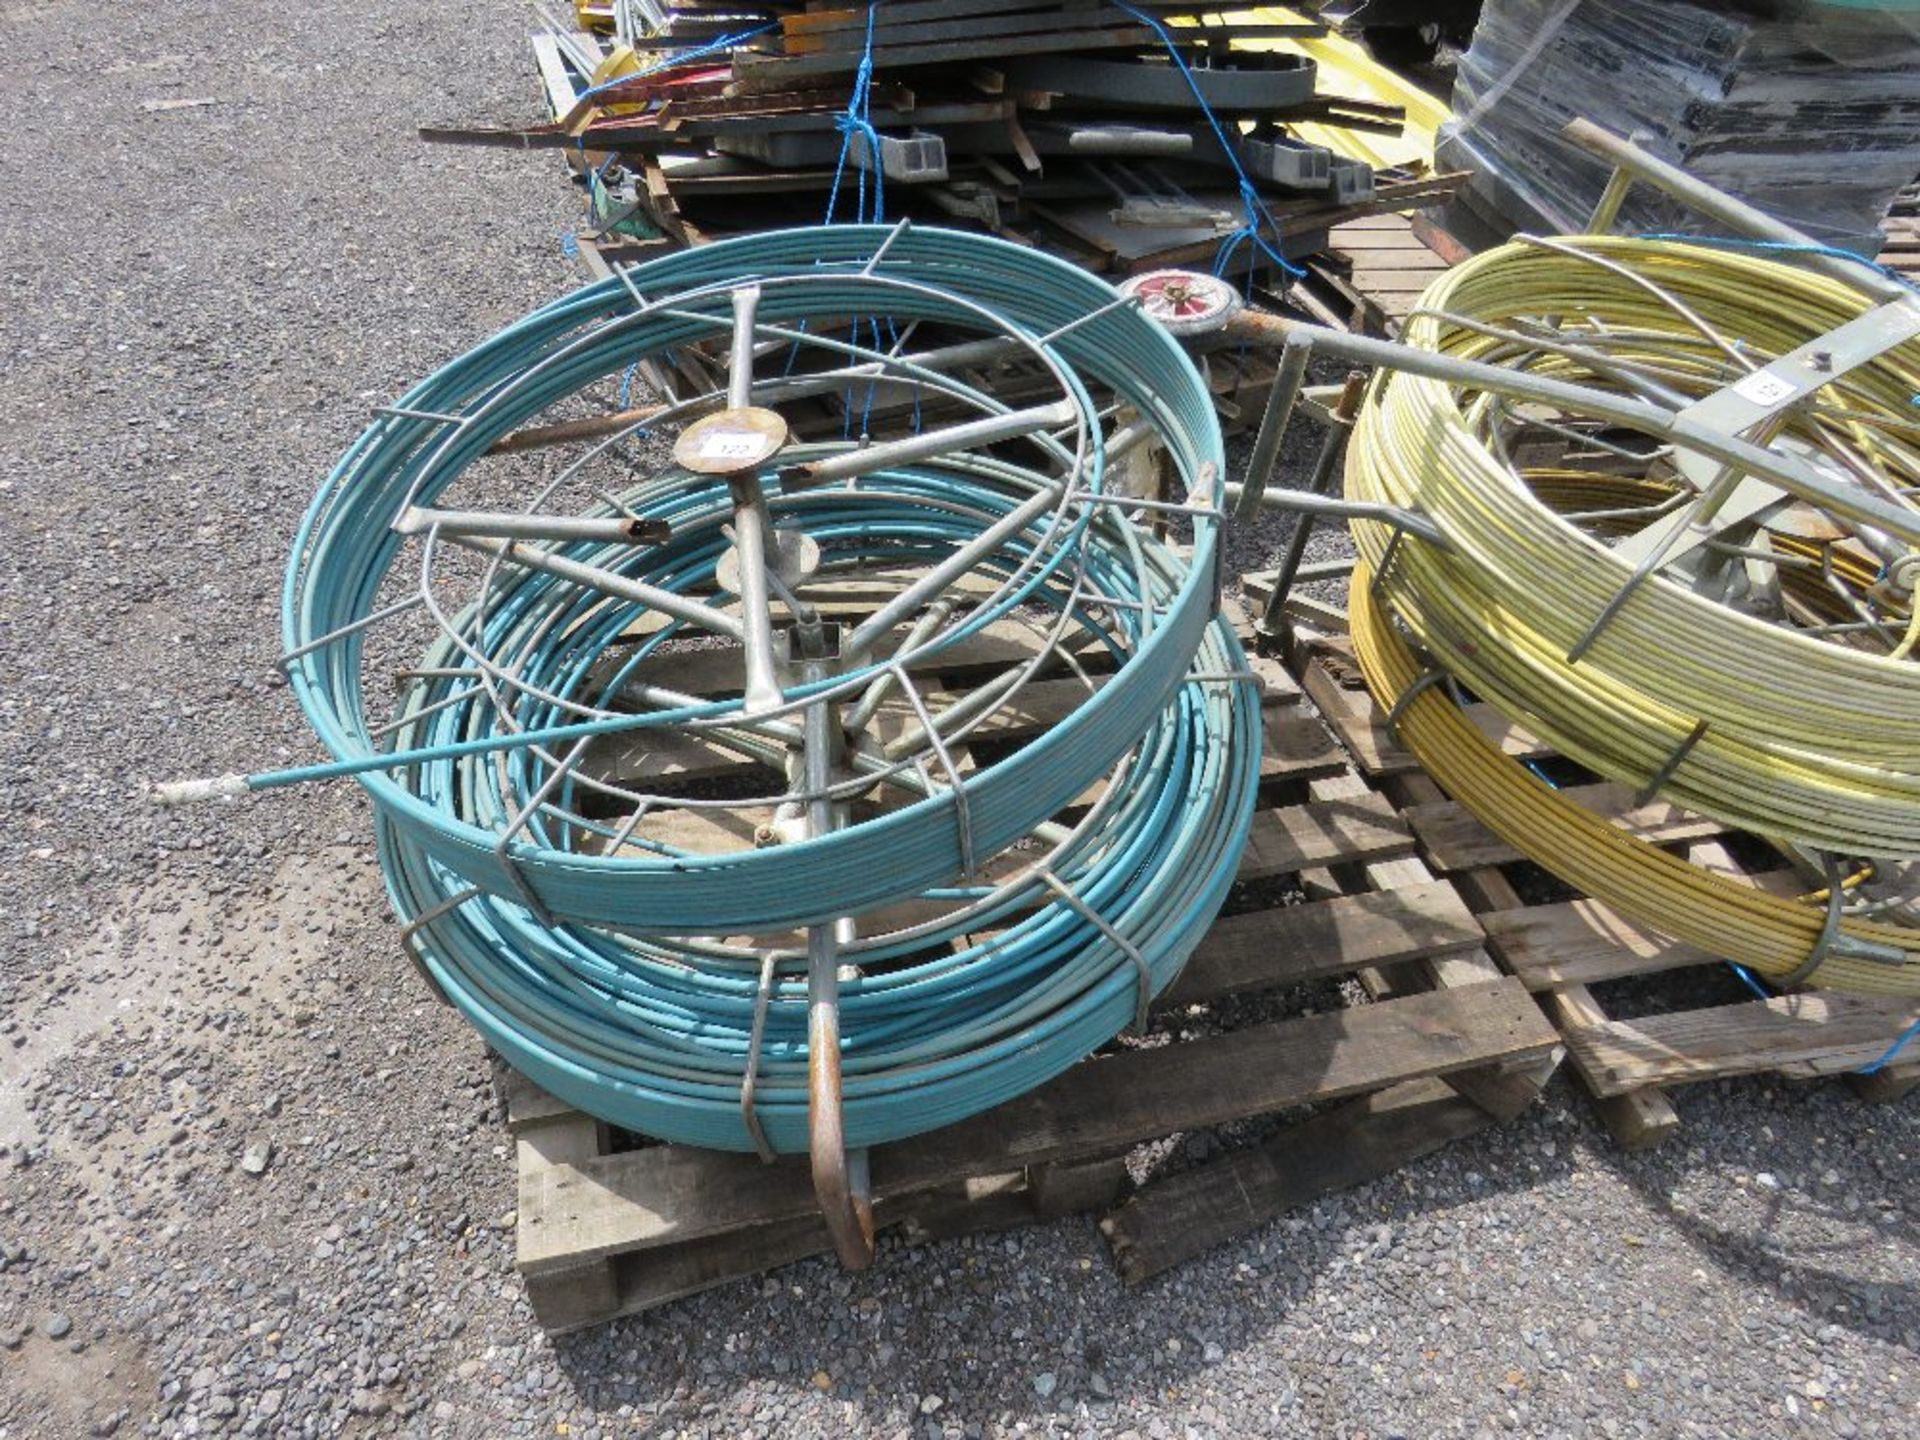 2 X BLUE CABLE RODDING REELS.